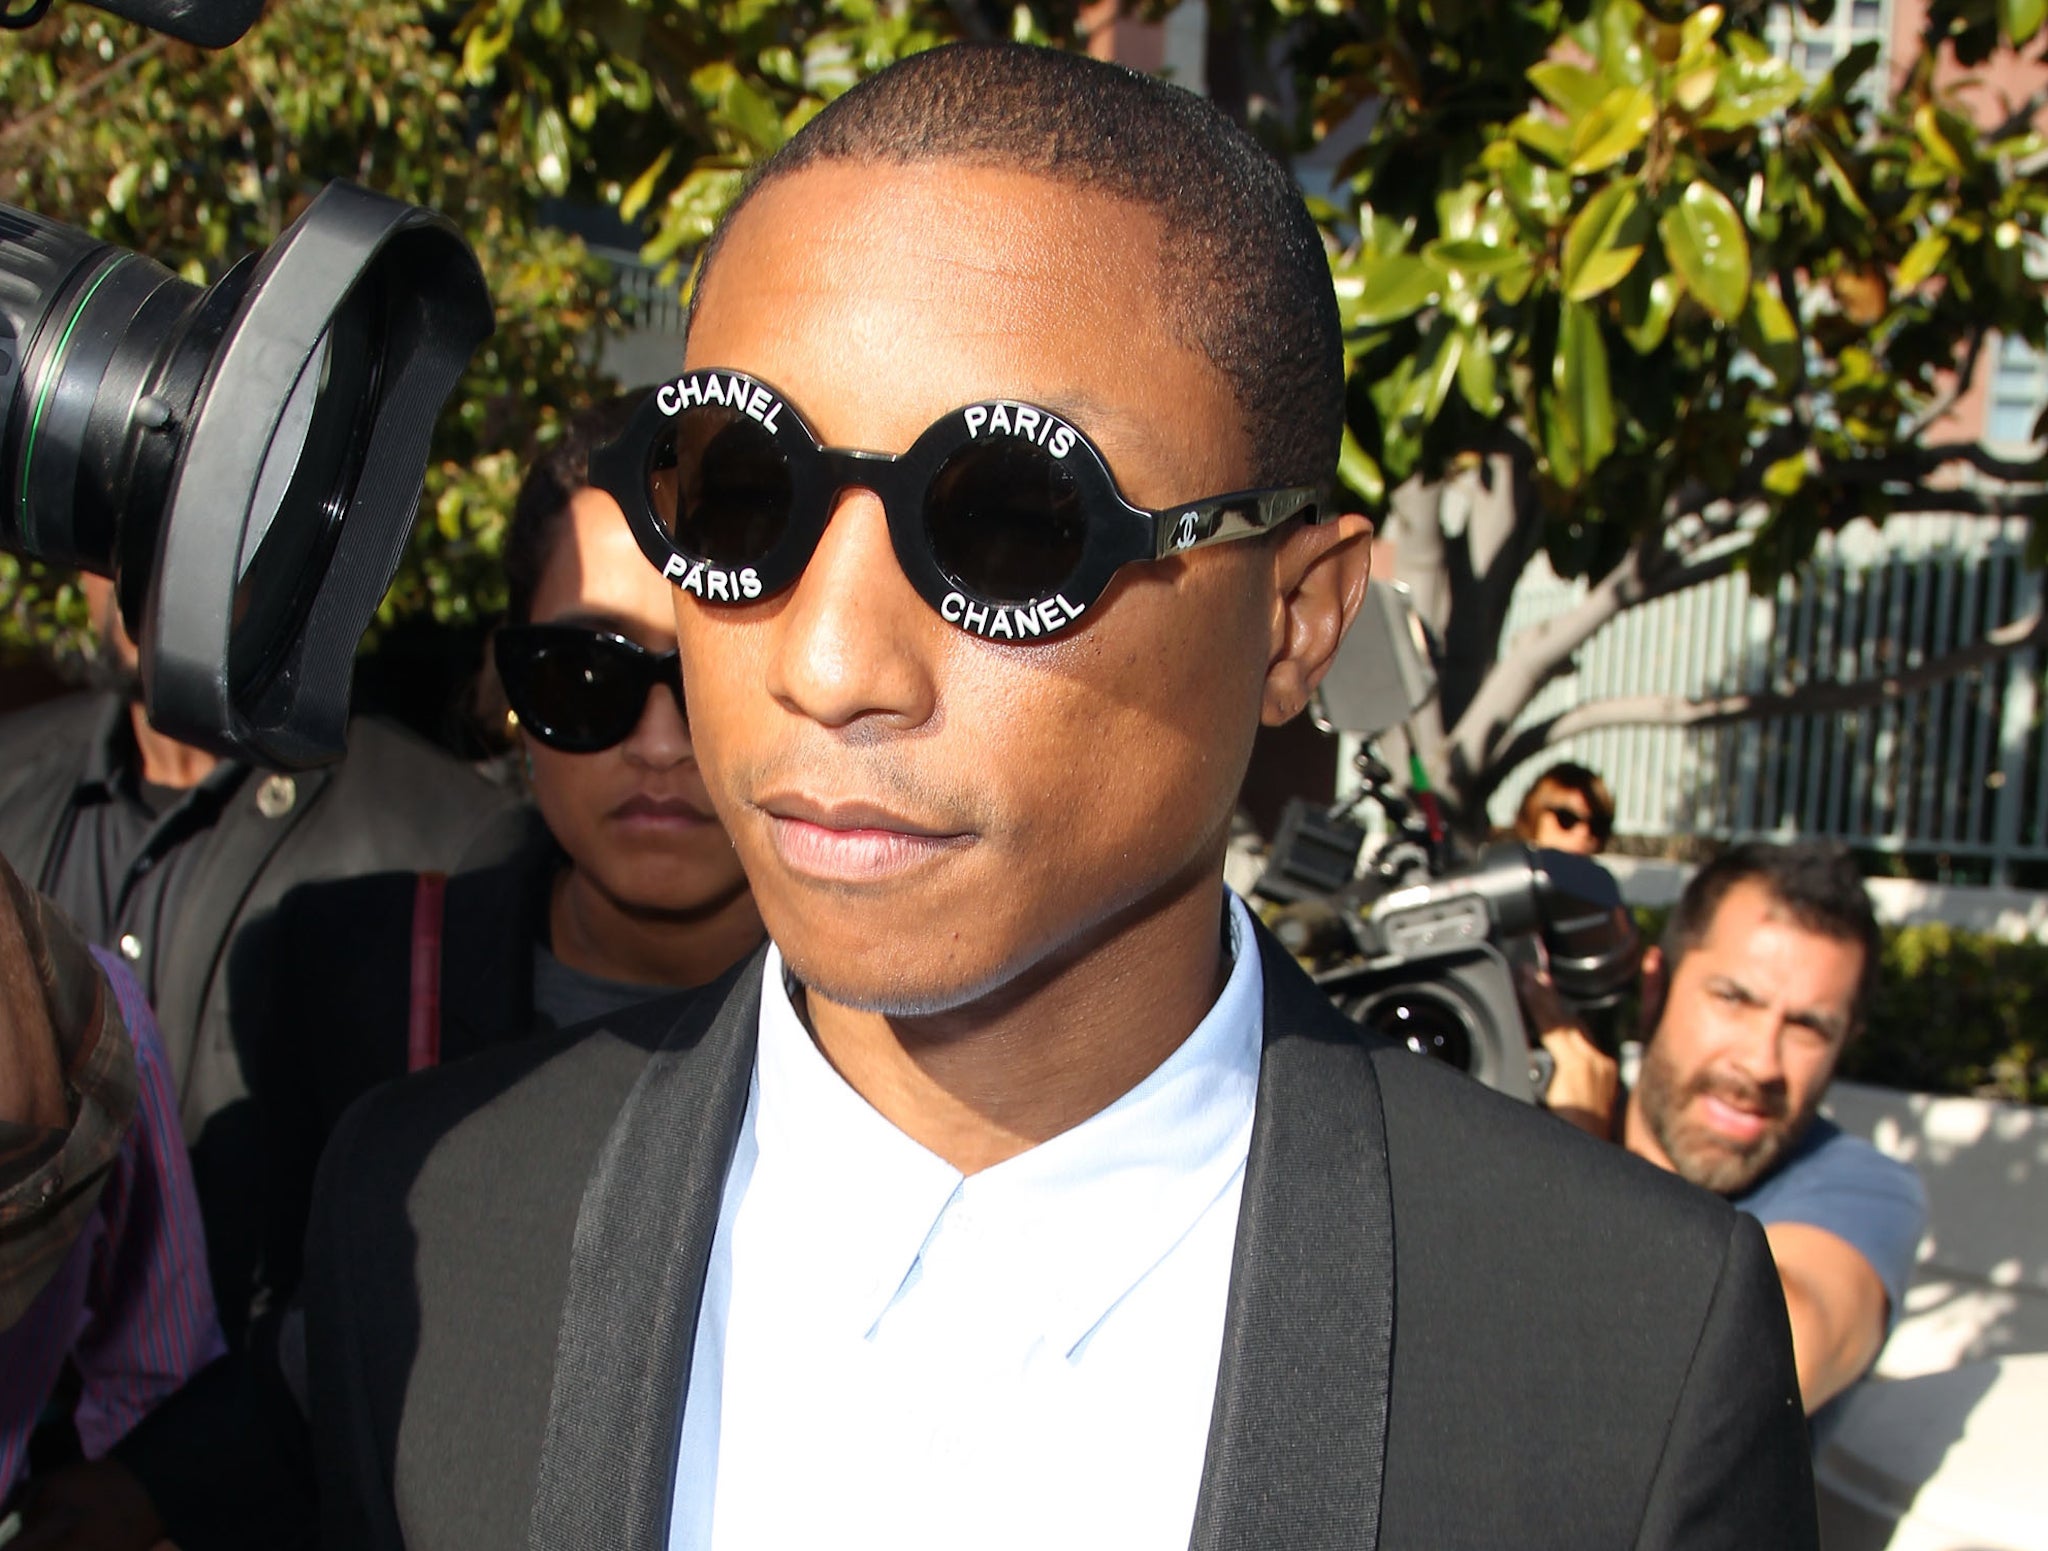 Pharrell Williams attends the 'Blurred Lines' trial in Los Angeles on 4 March 2015